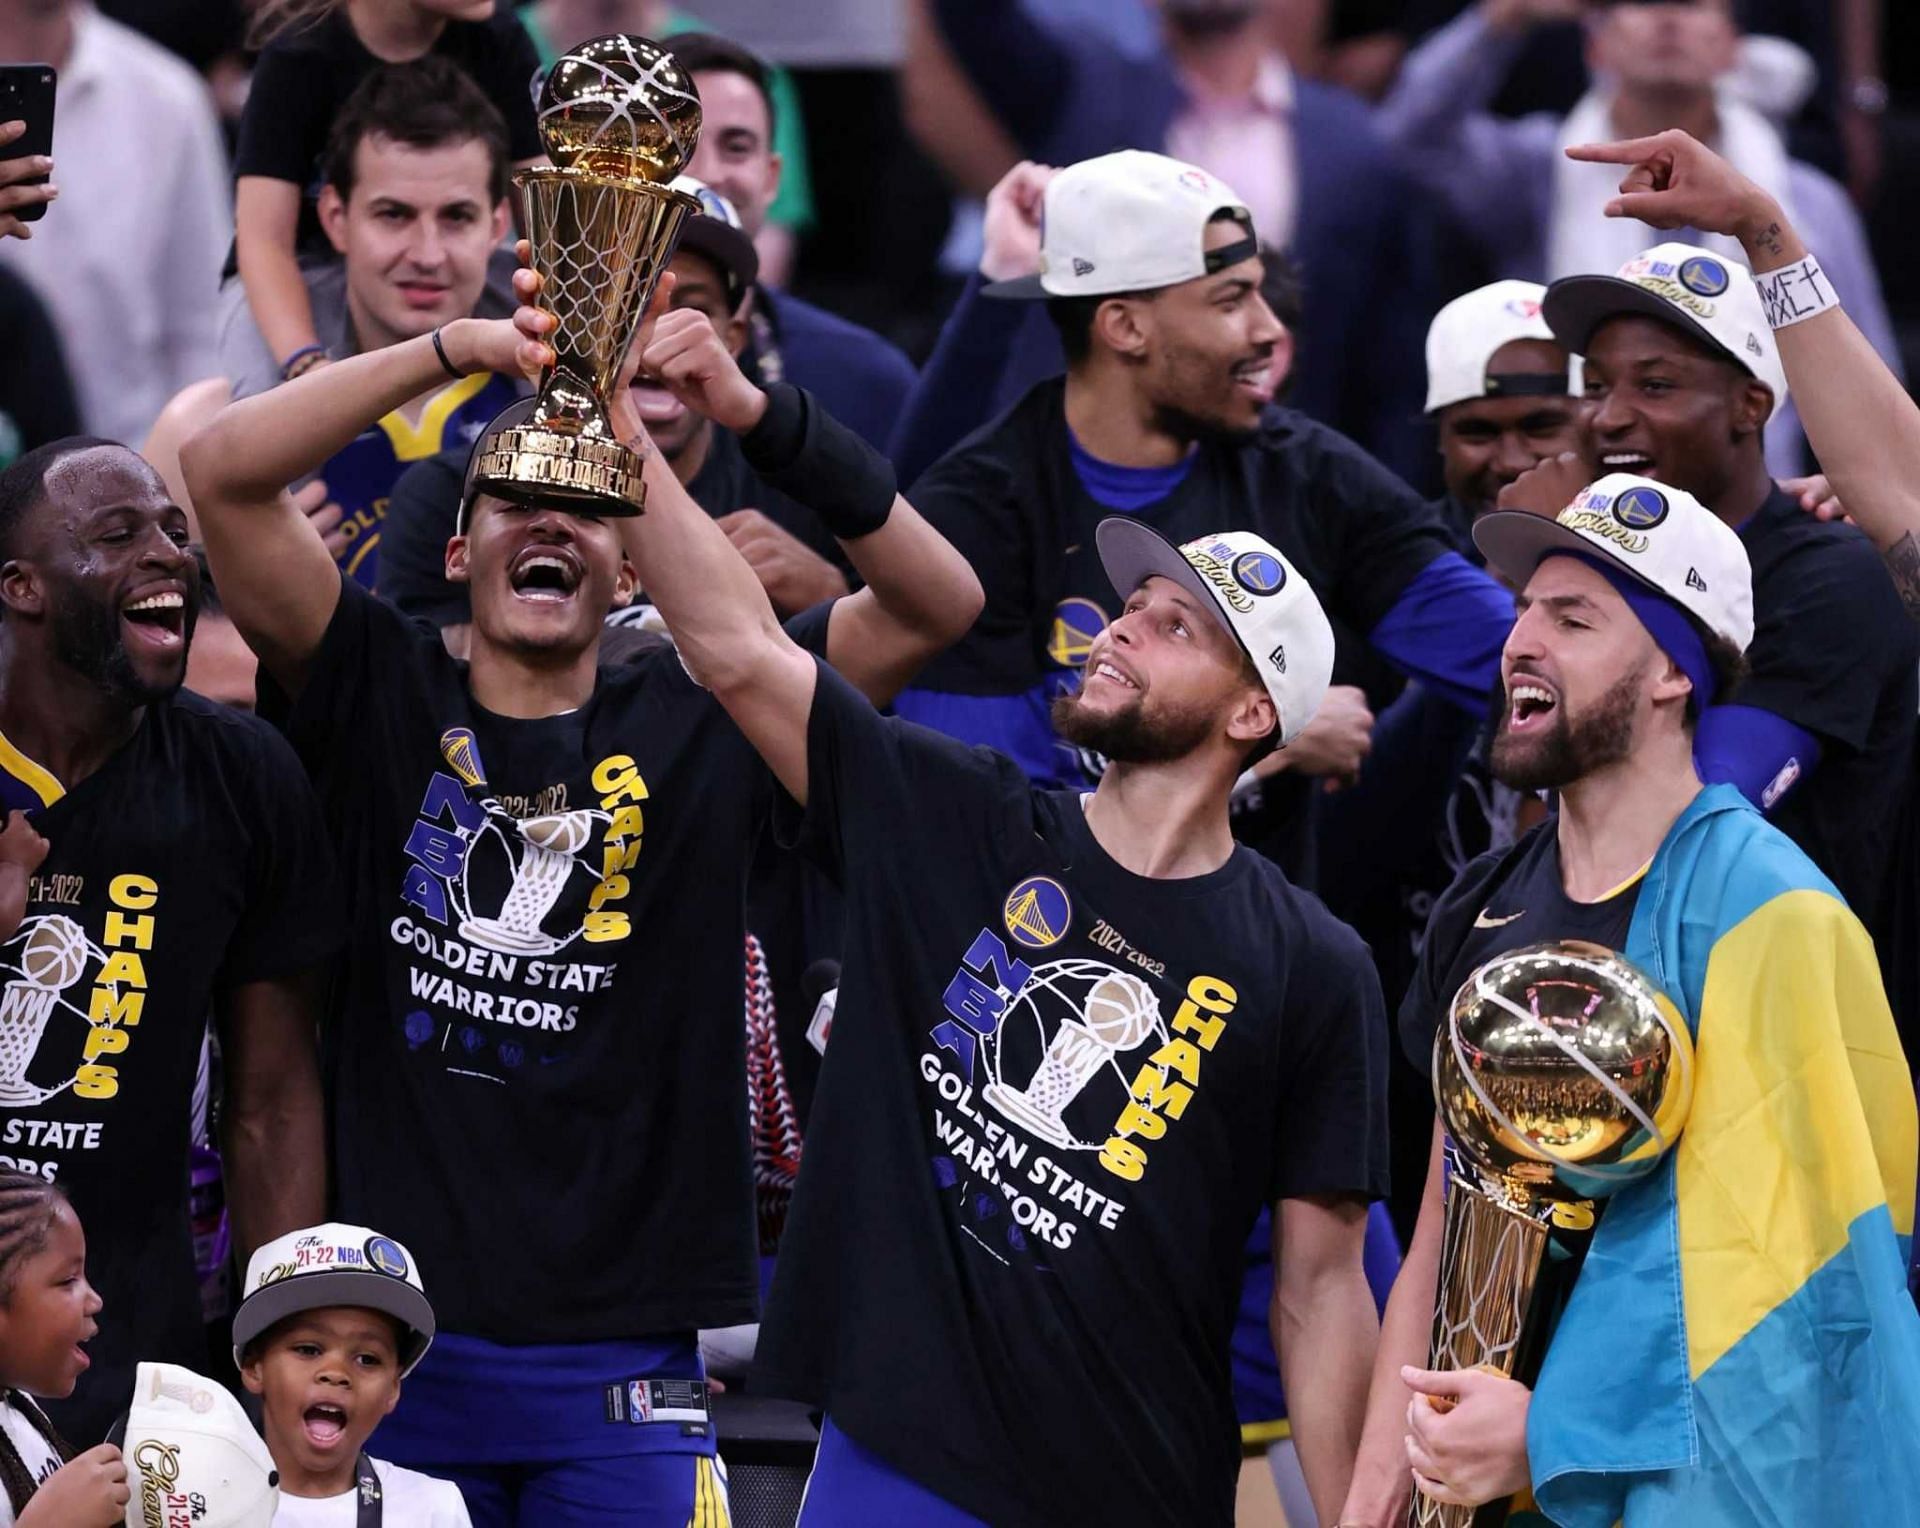 The Golden State Warriors have been punished by some fans for their four NBA titles, according to Andre Iguodala. [Photo: San Francisco Chronicle]